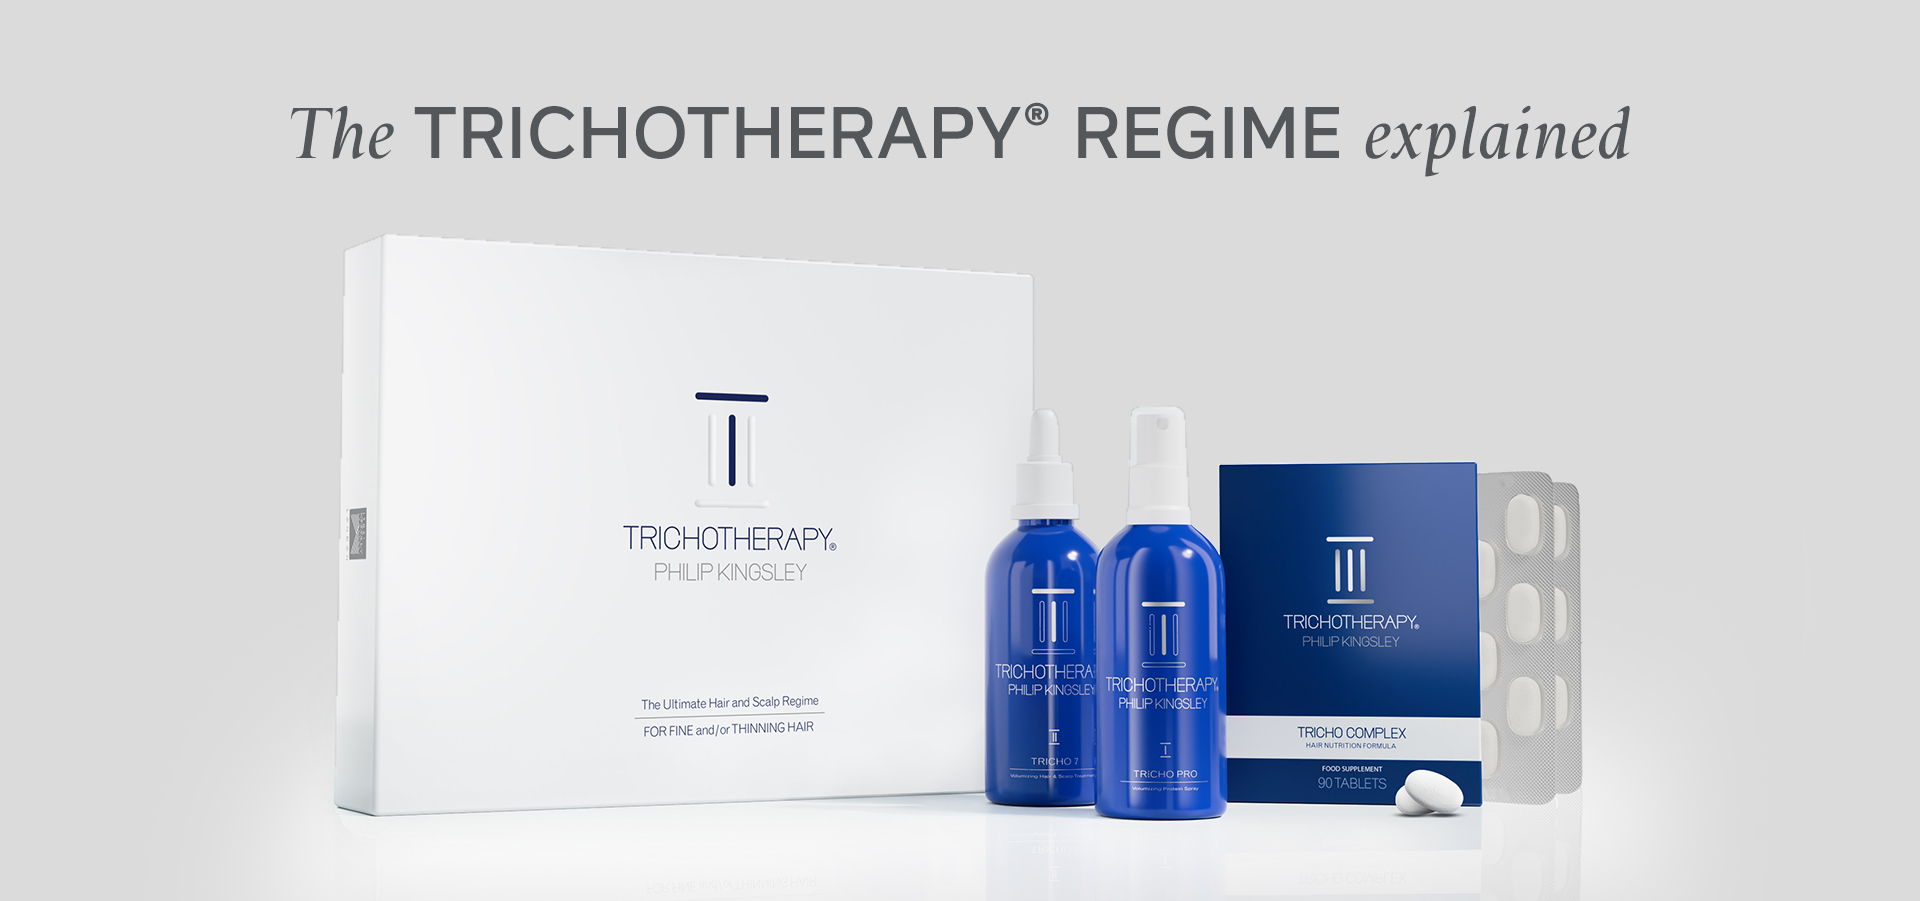 Trichotheraphy Explained 